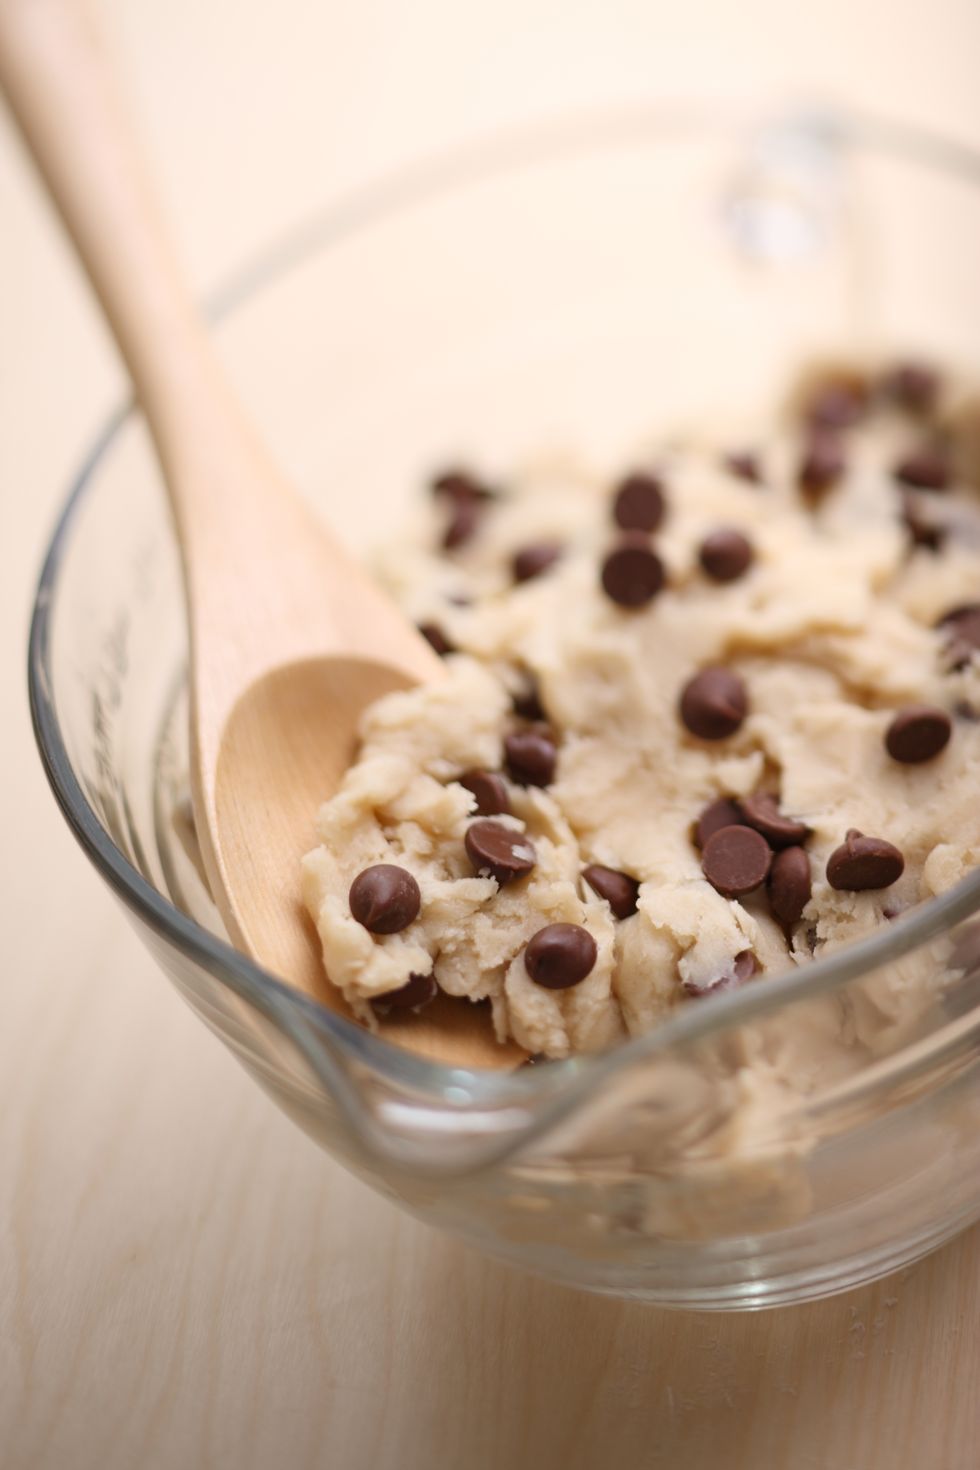 Whether it's homemade or store-bought, frozen cookie dough is your new best friend. Just scoop the dough out onto a cookie sheet and stick it into the freezer. Once frozen solid, put the individual frozen portions into freezer bags. Now you can bake as many cookies as you like whenever you want. Just add 1 to 2 minutes to the bake time.